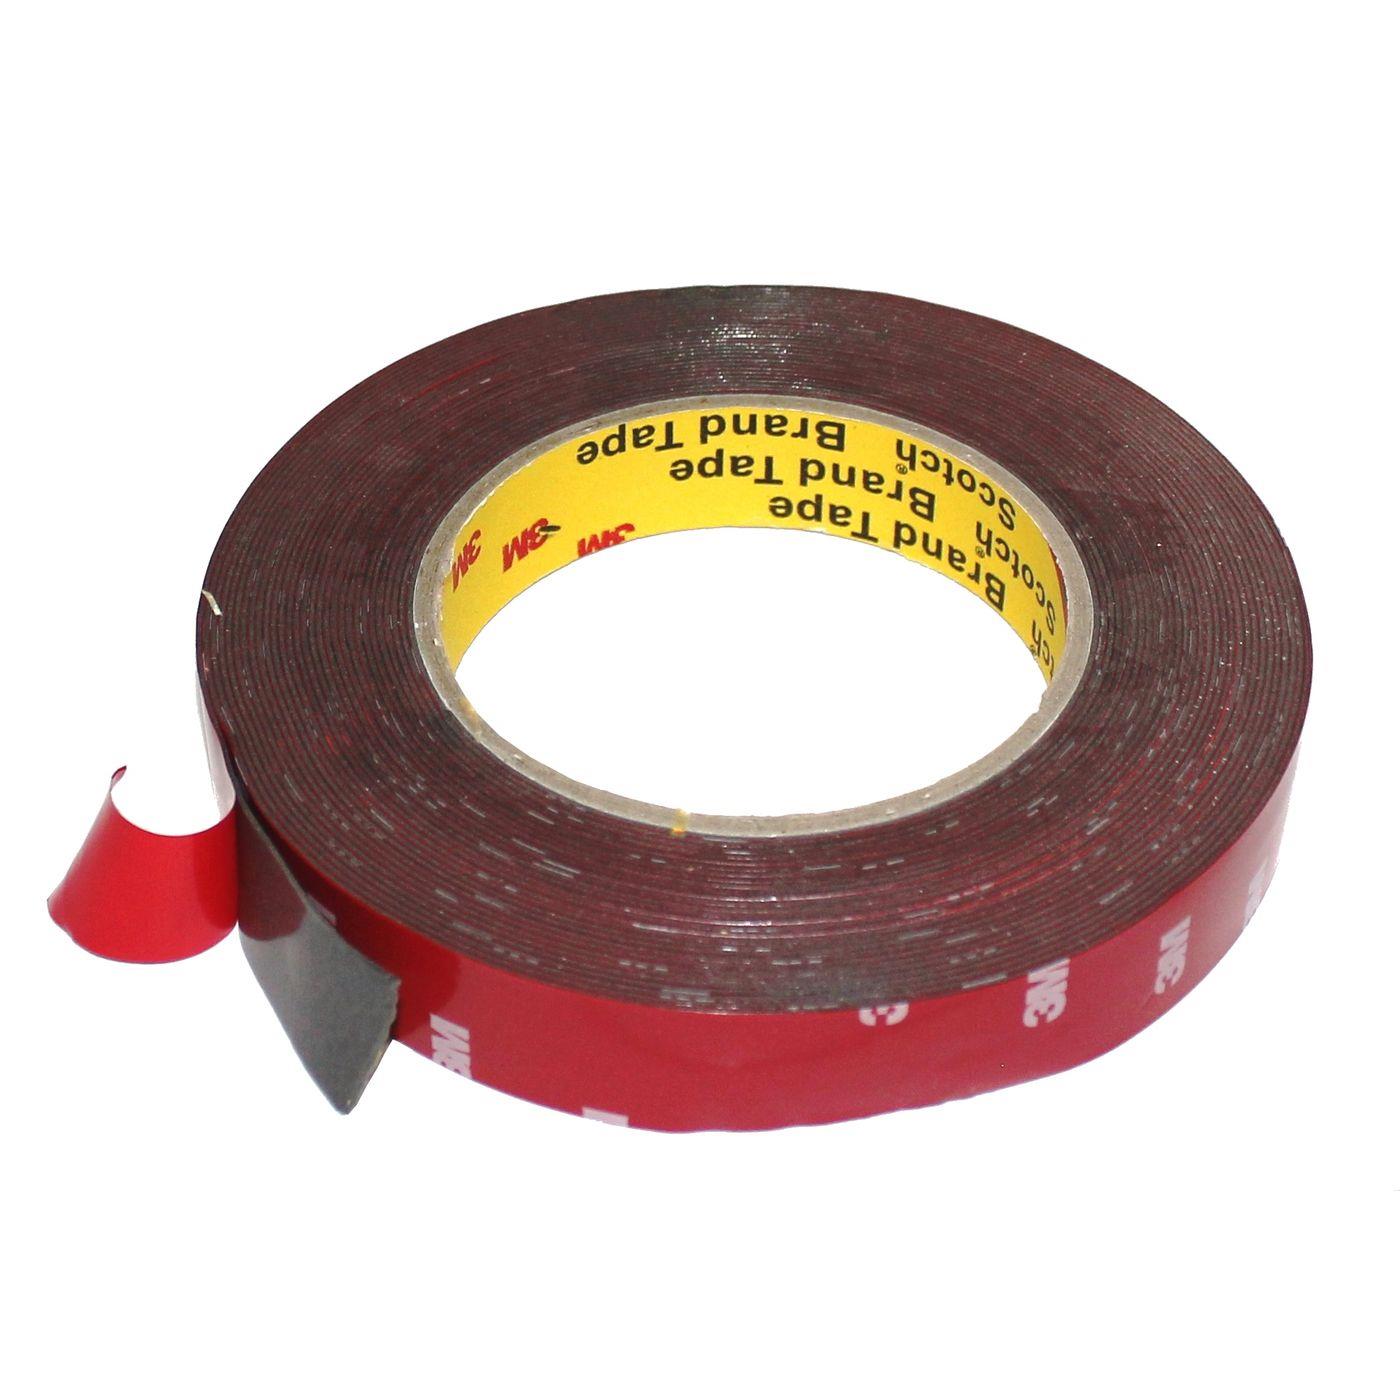 10m Double sided adhesive tape 3M 4229P 20mm Foam Adhesive Tape Car strong